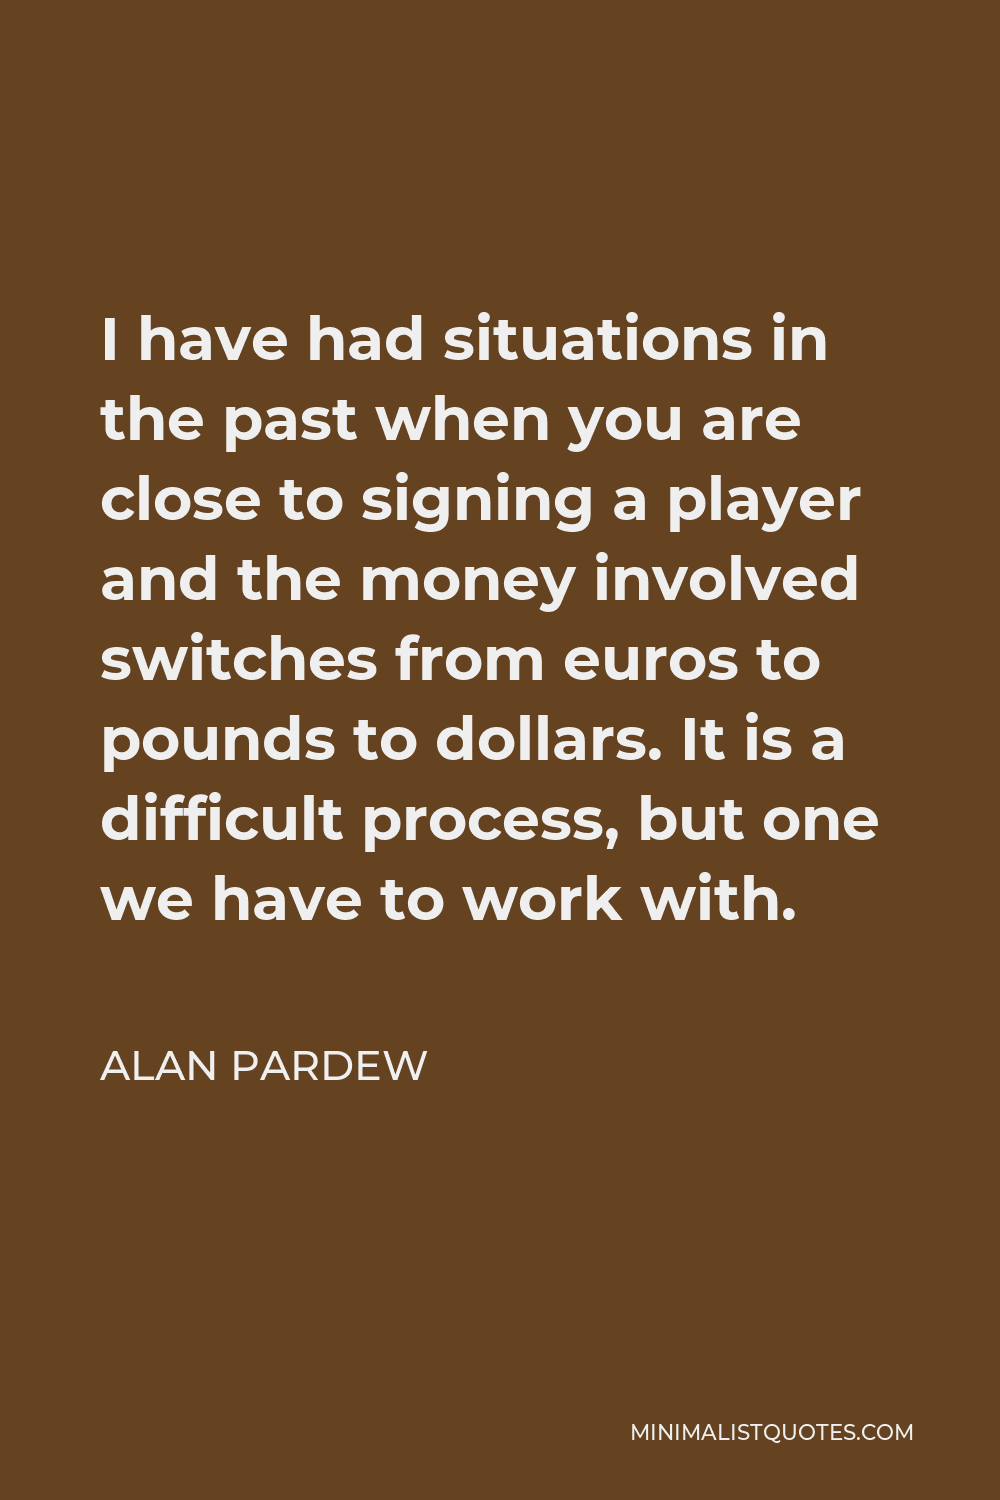 Alan Pardew Quote - I have had situations in the past when you are close to signing a player and the money involved switches from euros to pounds to dollars. It is a difficult process, but one we have to work with.